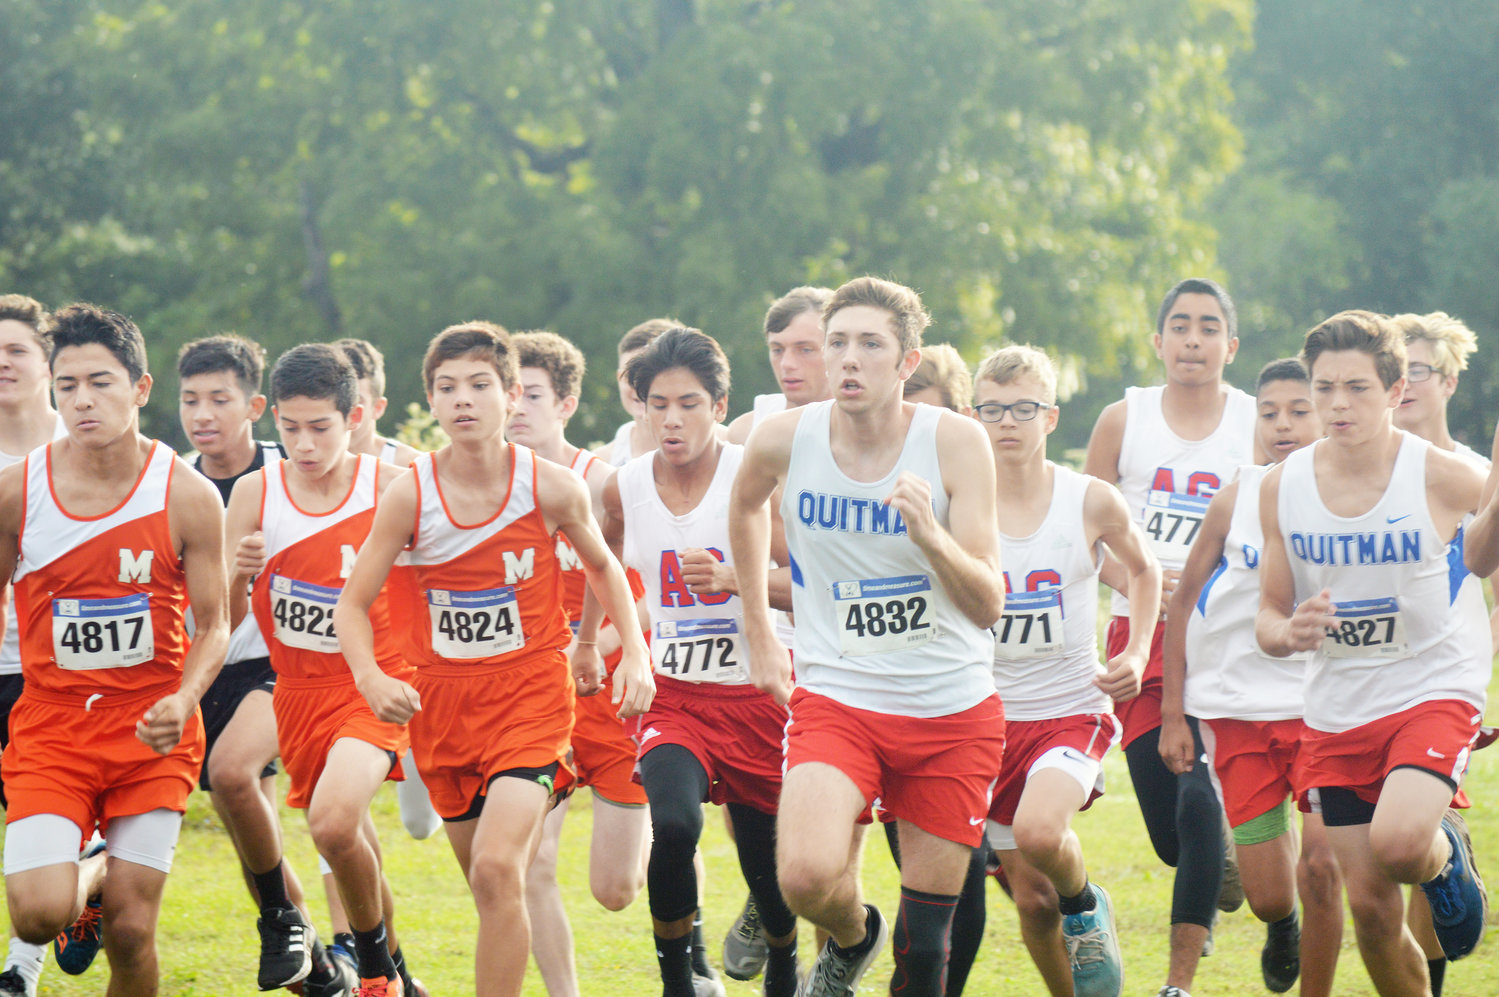 Quitman, Mineola and Alba-Golden runners take off from the starting line at Saturday’s district cross country meet.